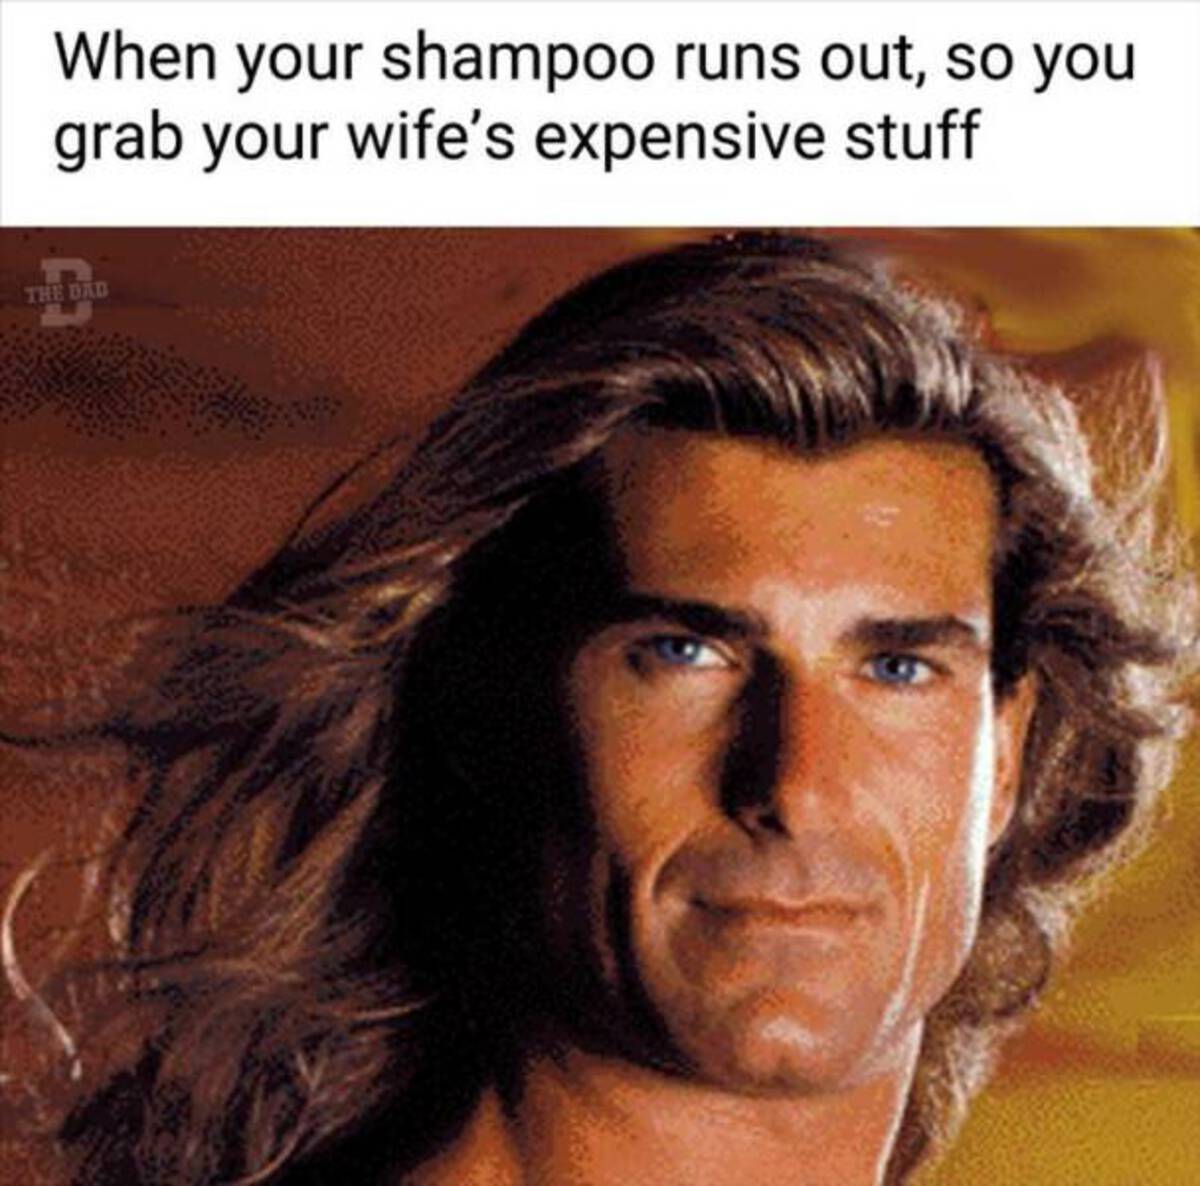 romance novel long hair man - When your shampoo runs out, so you grab your wife's expensive stuff The Dad